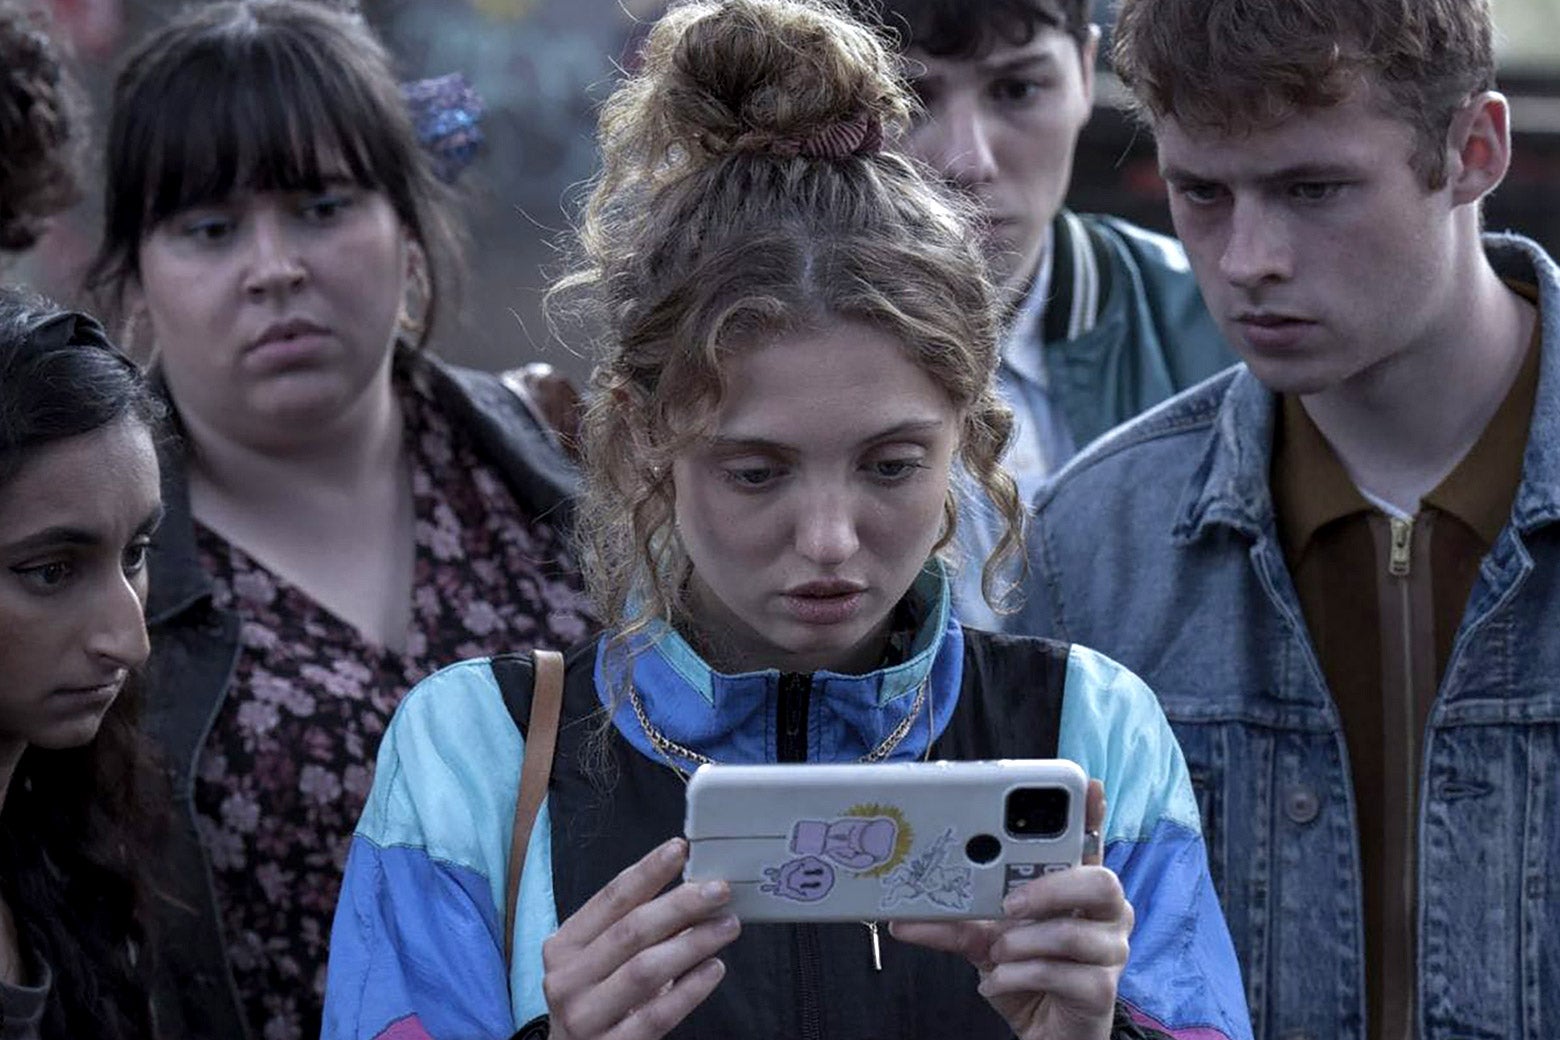 A teen looks shocked holding her smartphone in a crowd.